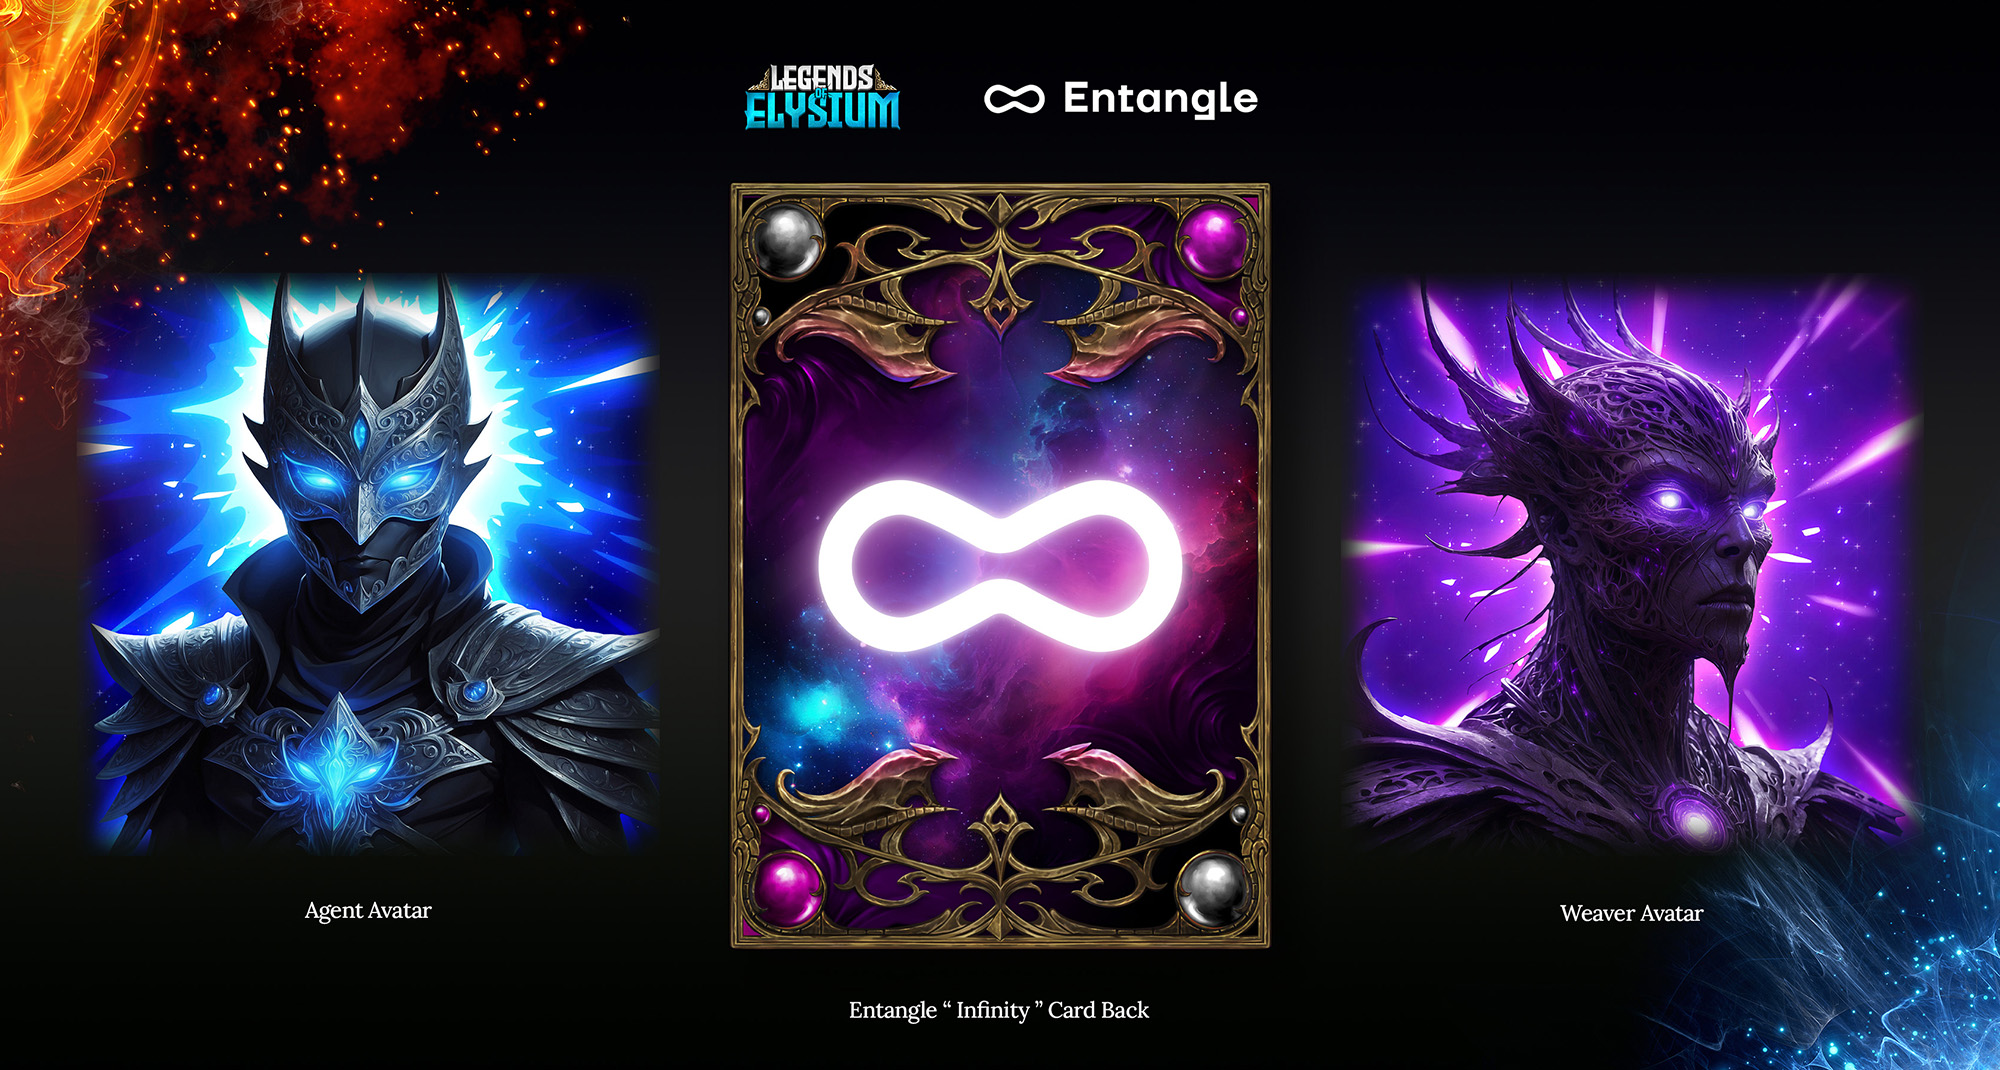 $2000 of NGL Entangle and $2000 LOE Legends of Elysium - for grabs! The virtual world is buzzing with excitement as two giants, @Entanglefi and @LegendsElysium, have teamed up to launch an exhilarating campaign that's set to captivate gamers and crypto enthusiasts alike! 